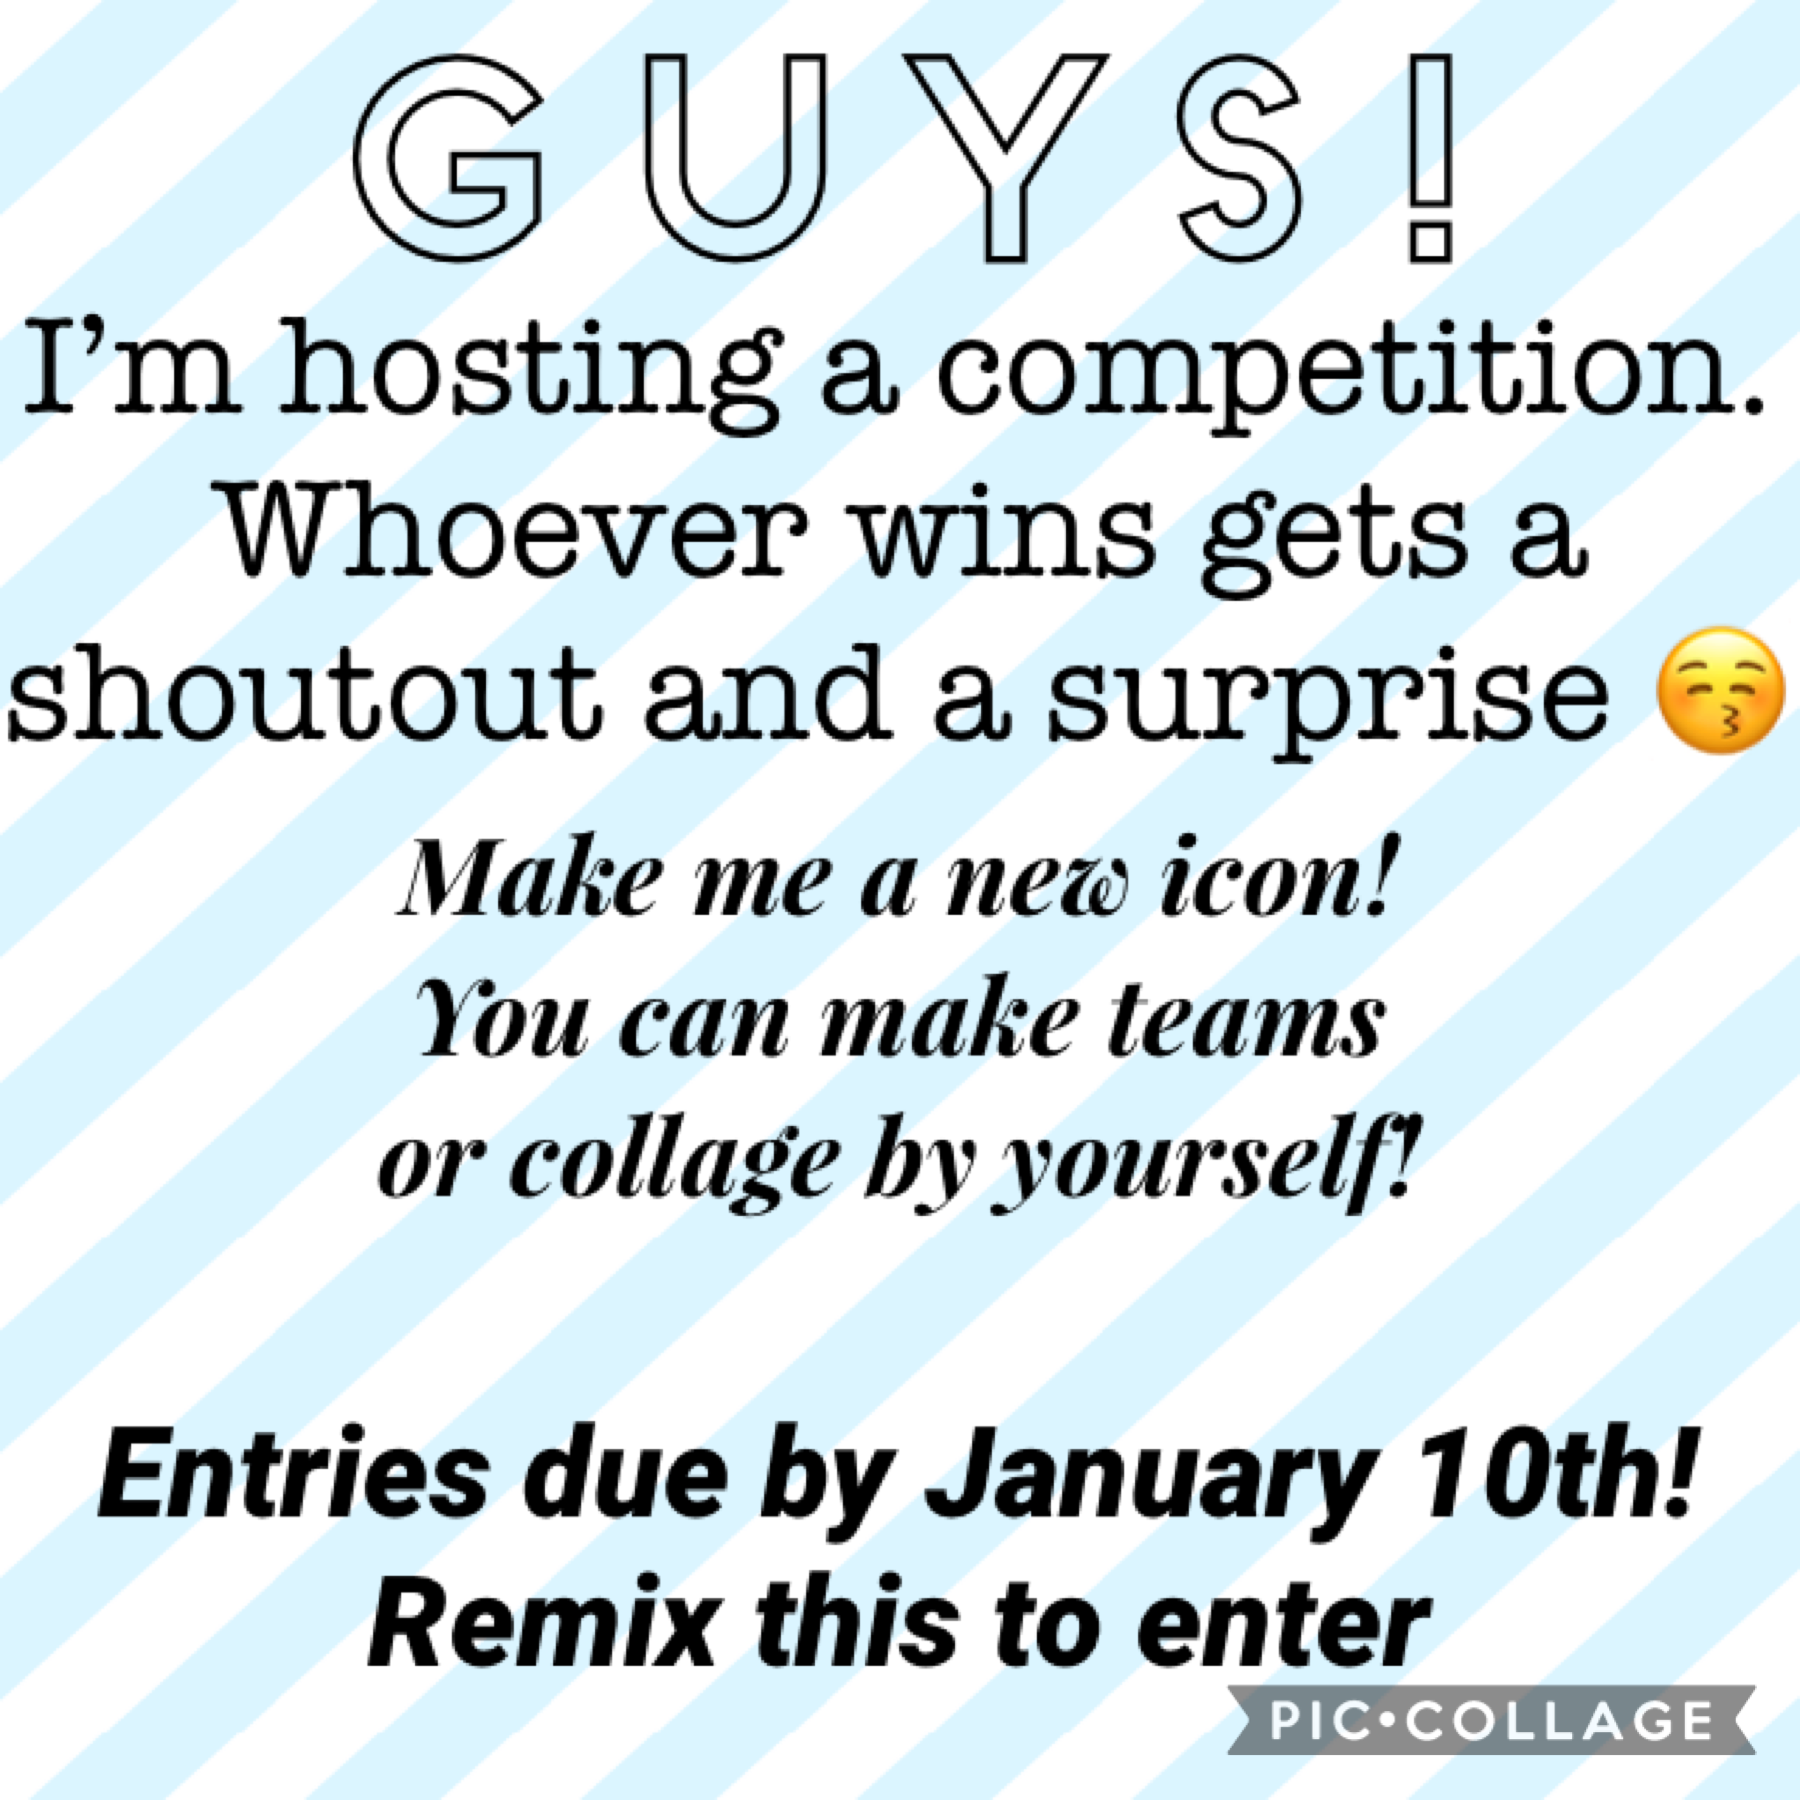 Please enter! I’ve never done a competition before. Merry Christmas! ❤️